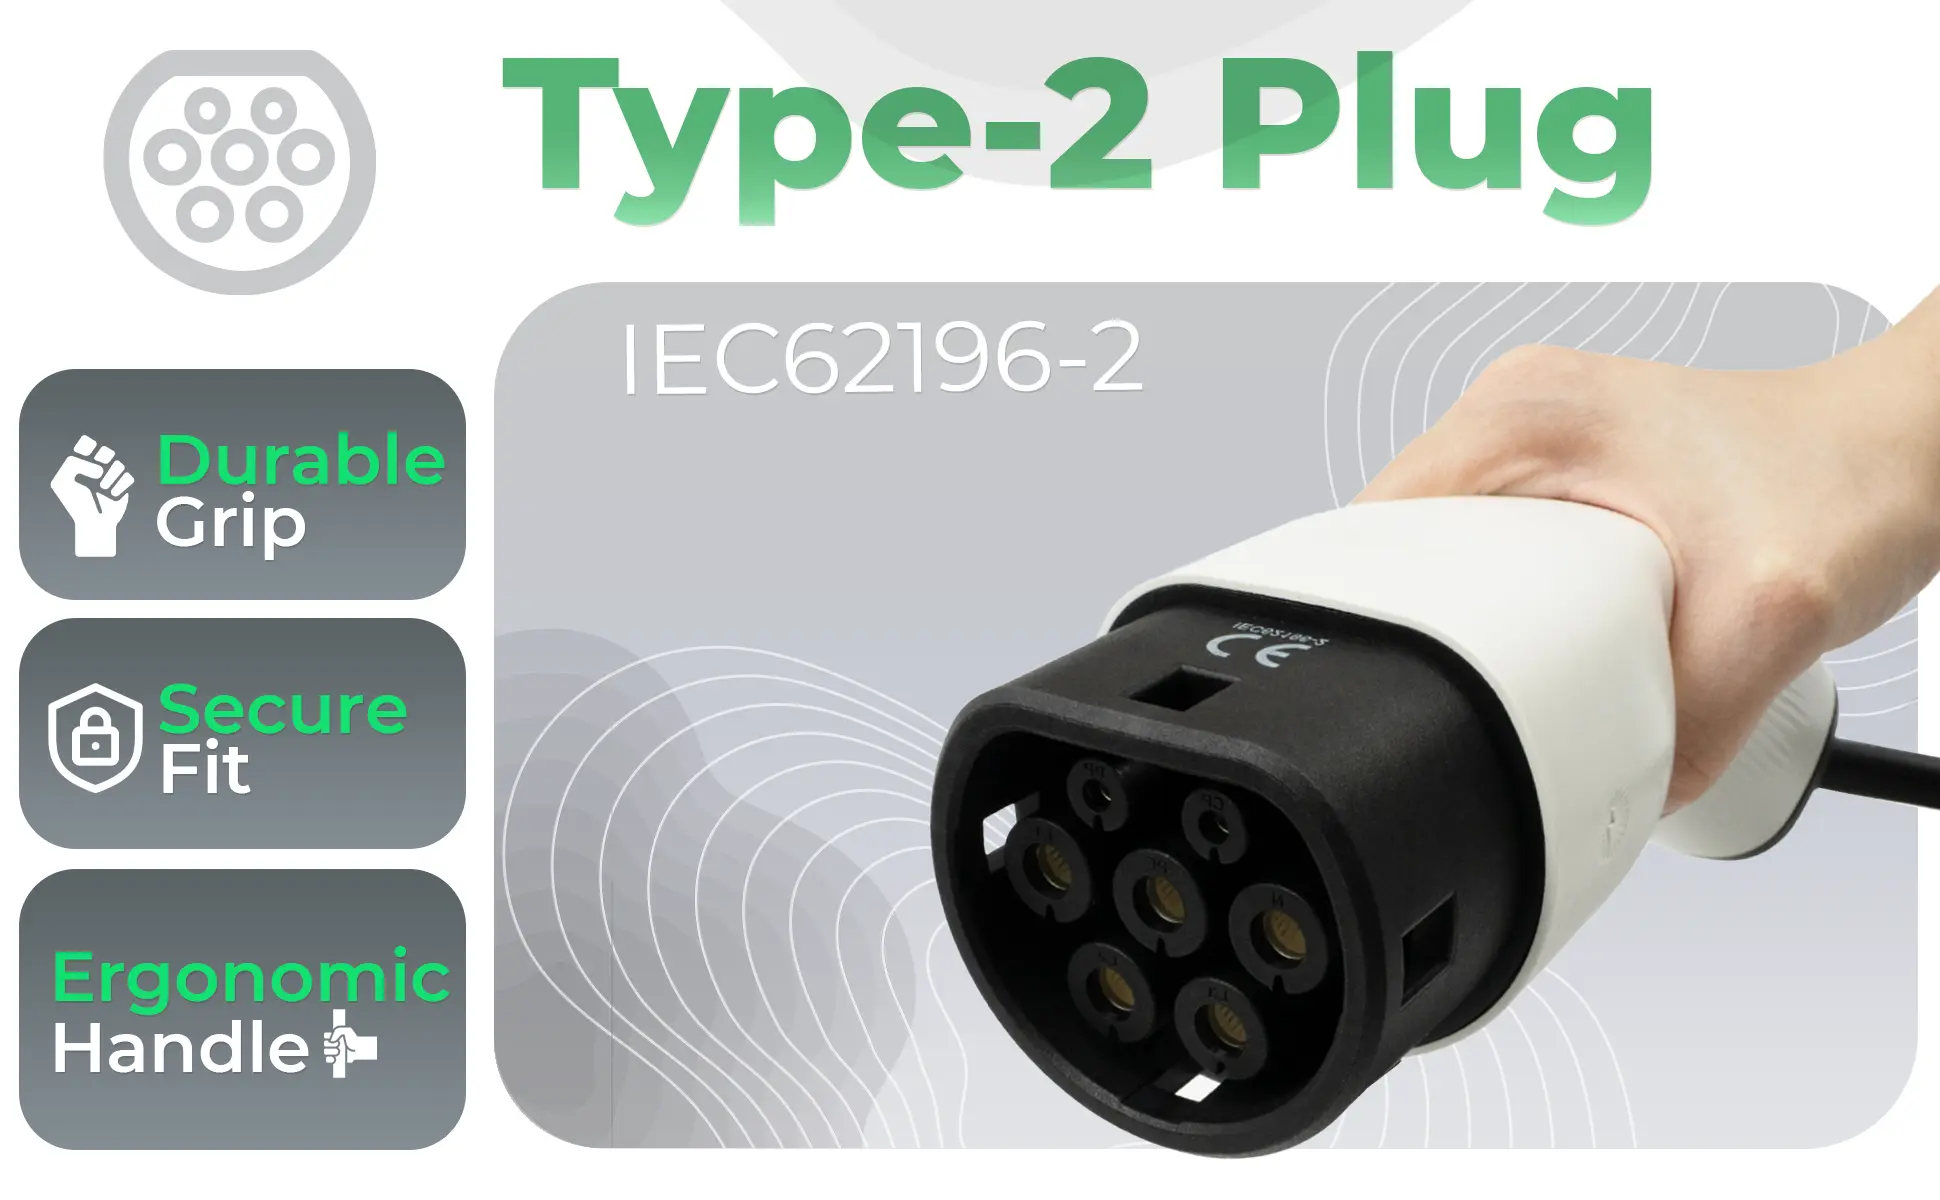 Aveo 3.6kw Portable EV Charger with type 2 (IEC 62196-2) connector